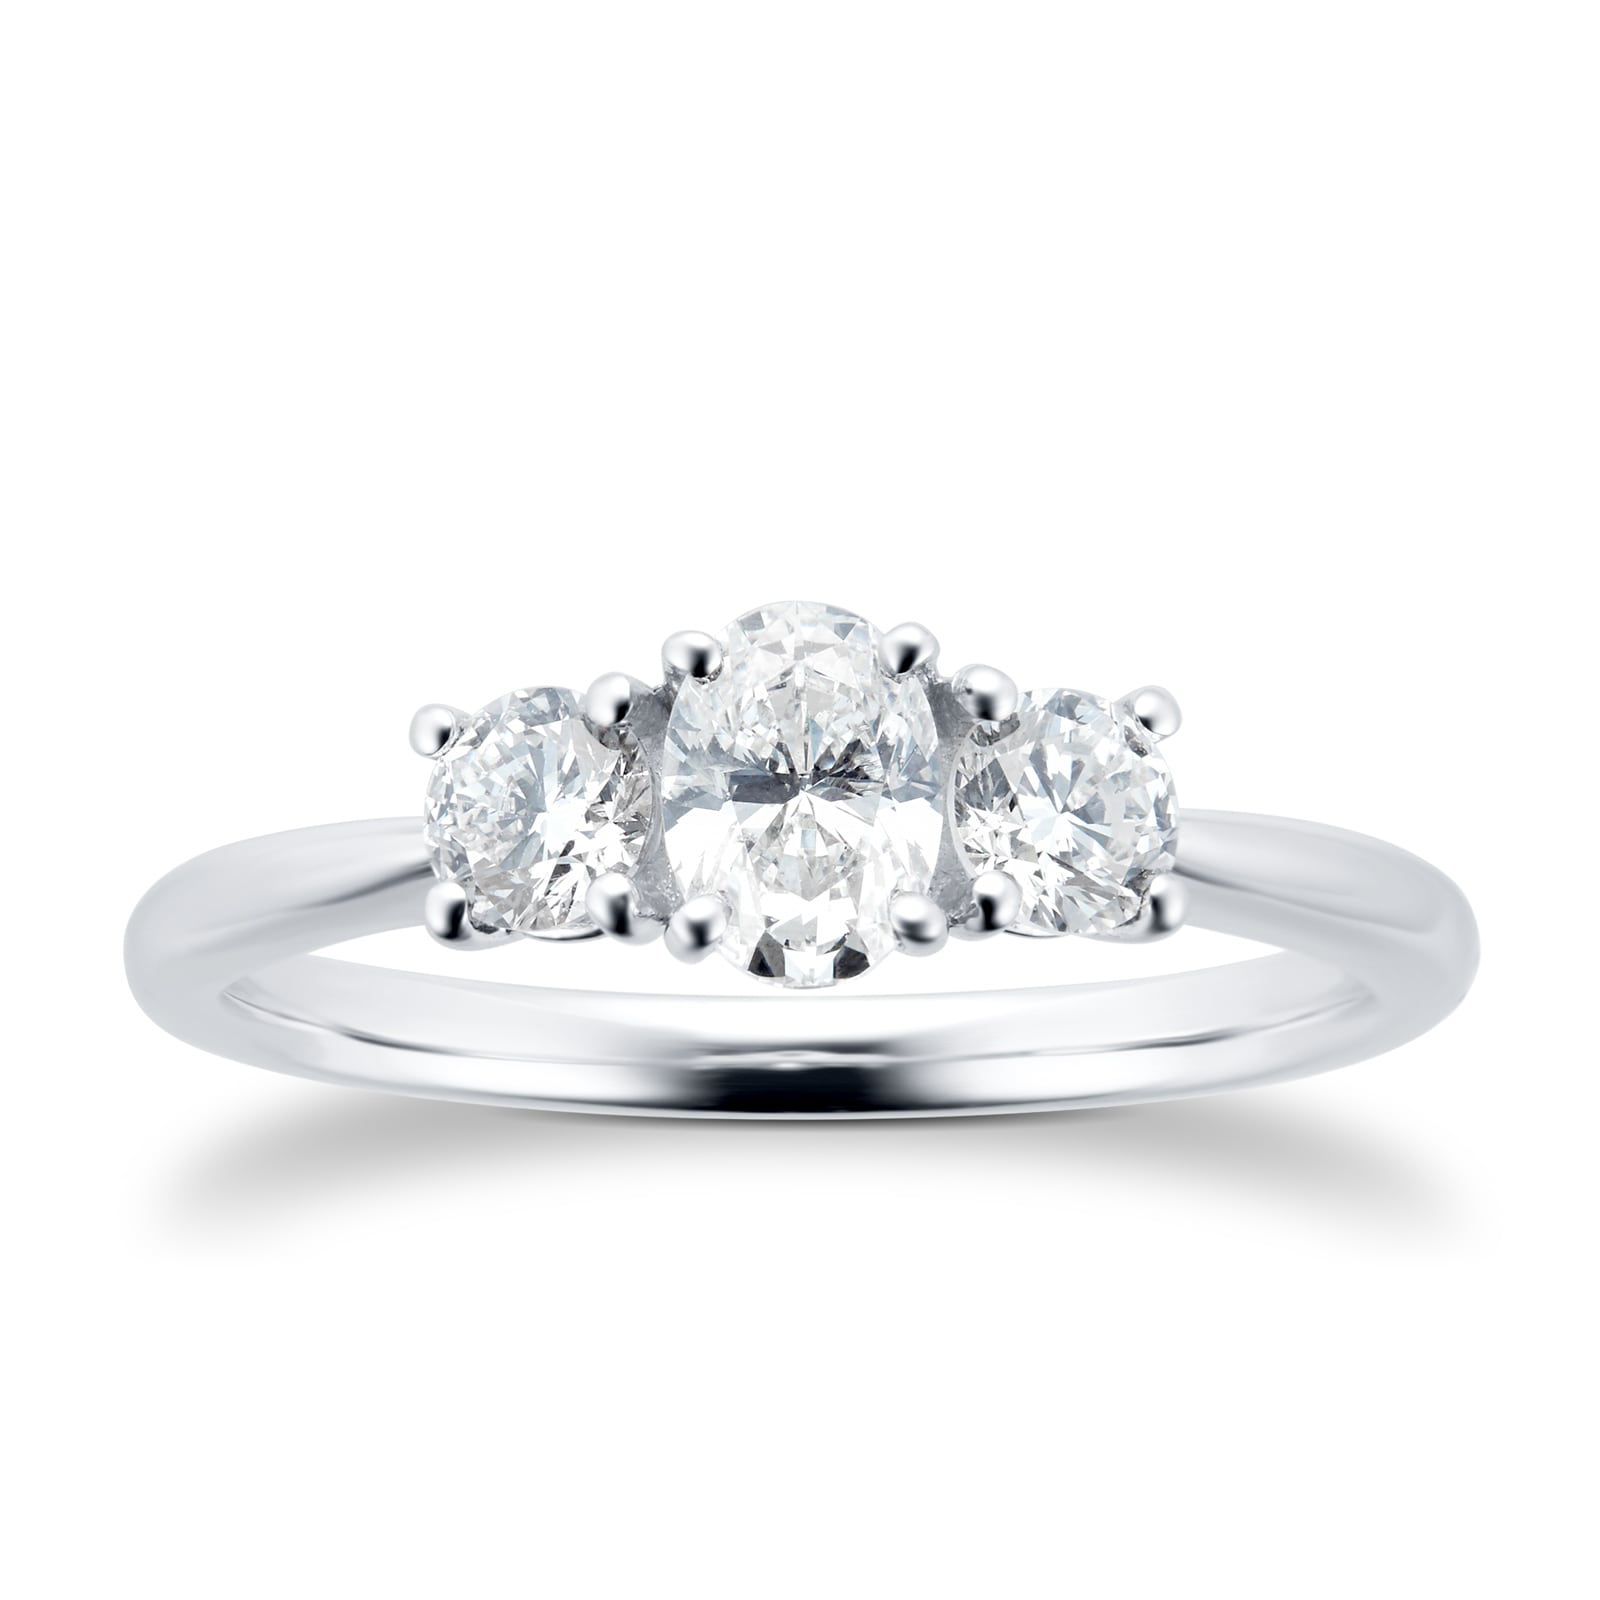 Platinum 0.76cttw Diamond Thee Stone Oval & Brilliant Cut Engagement Ring - Ring Size O